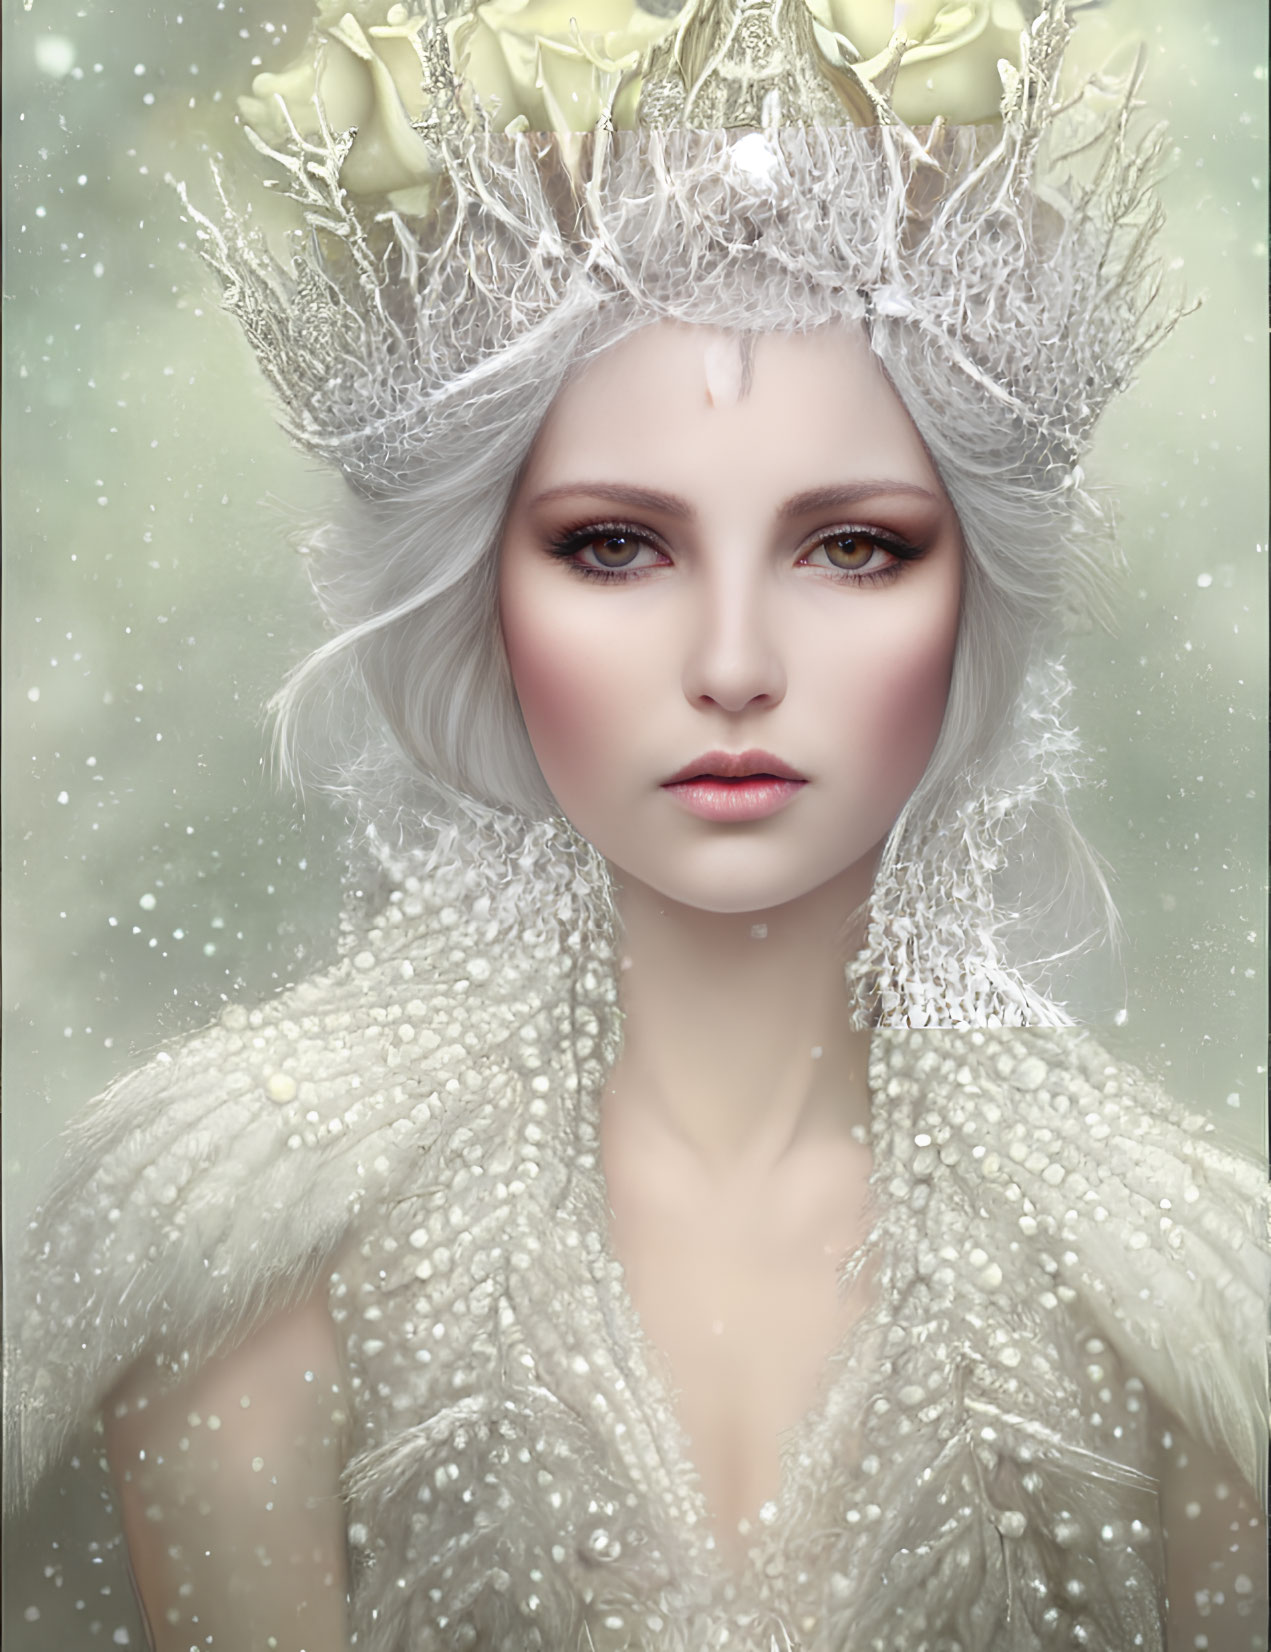 Silver-haired woman in crown and white dress against snowy background